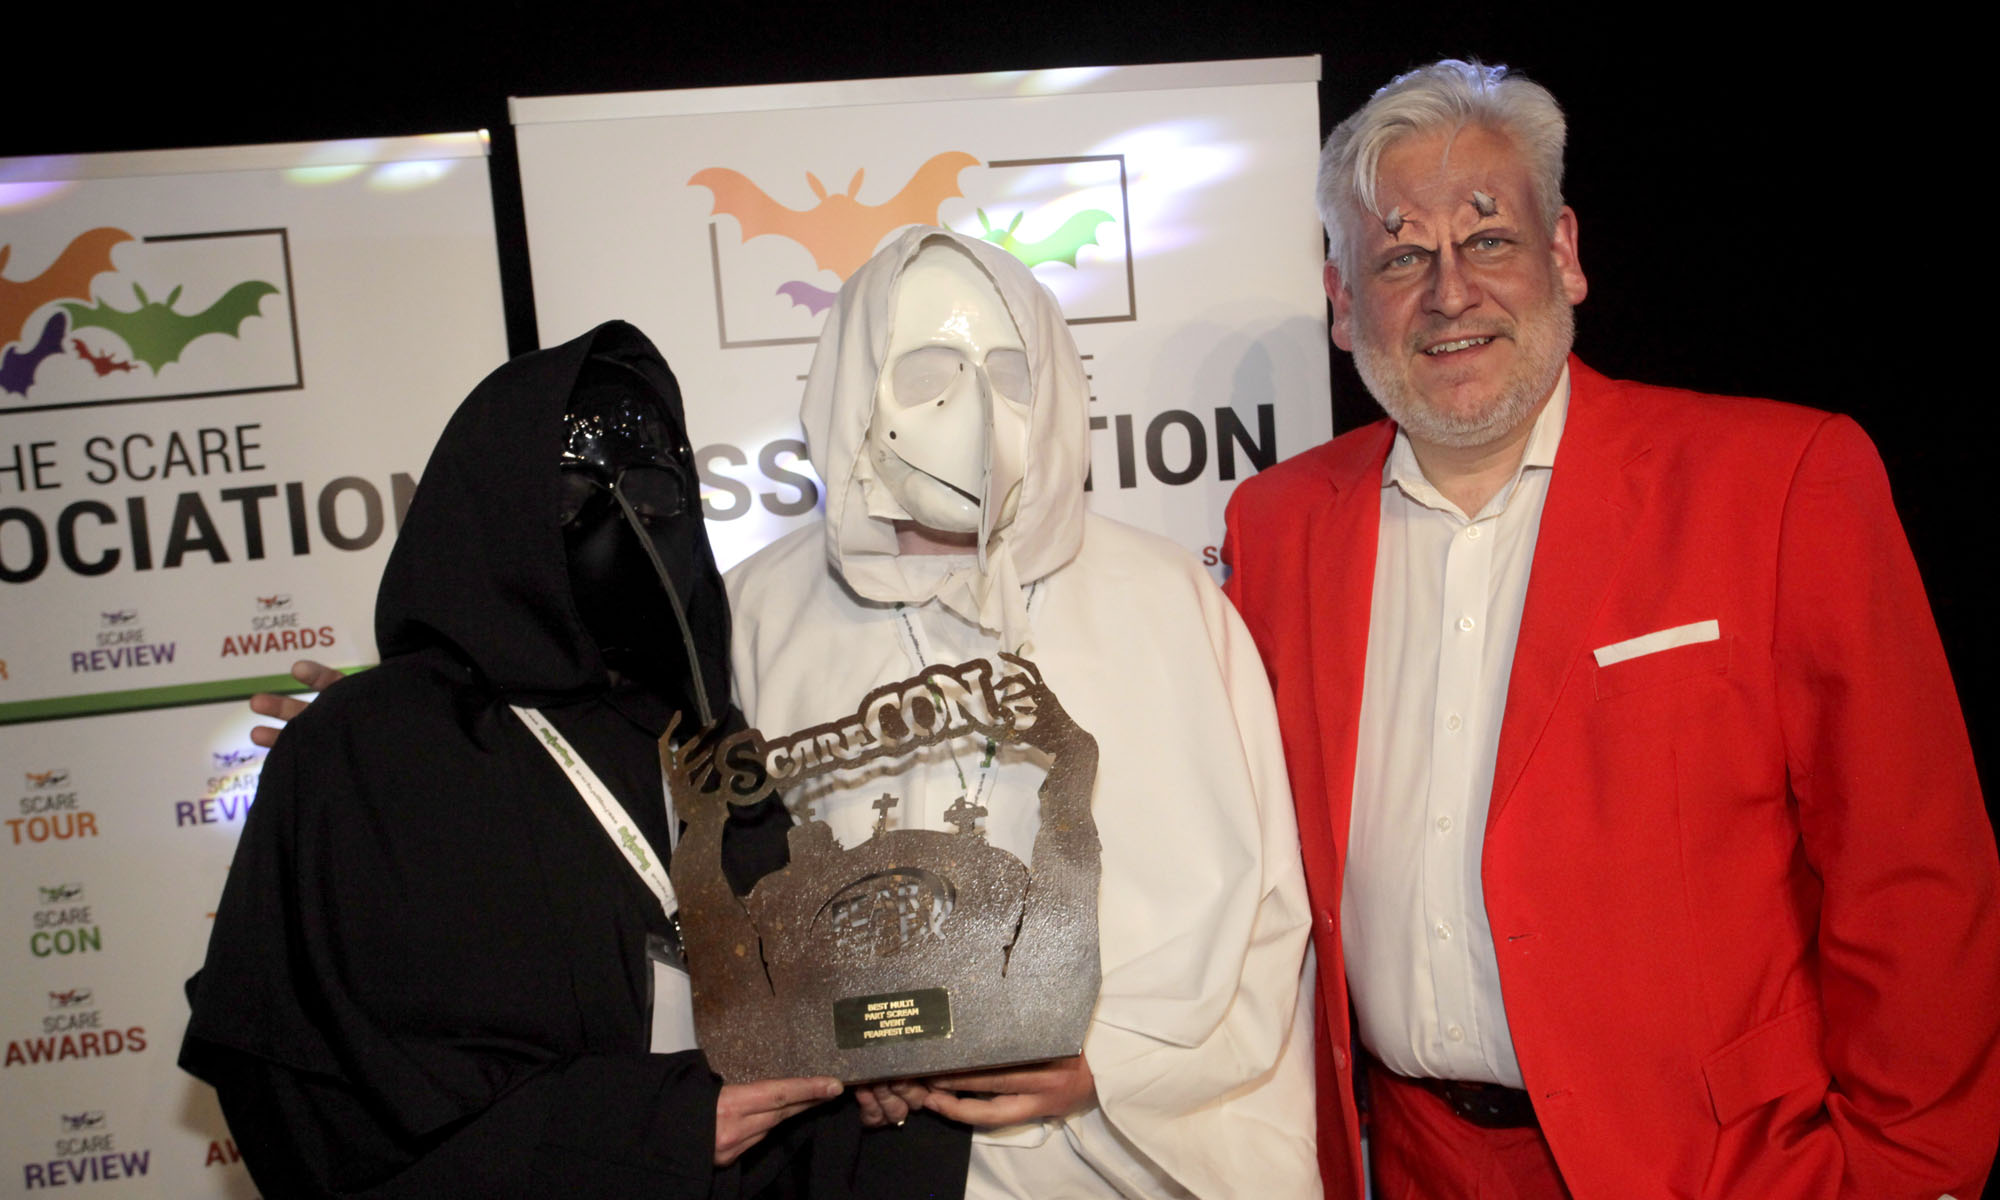 FearFest-Evil receives 'Best Multi Part Scream Event' at the 2019 ScareCON awards